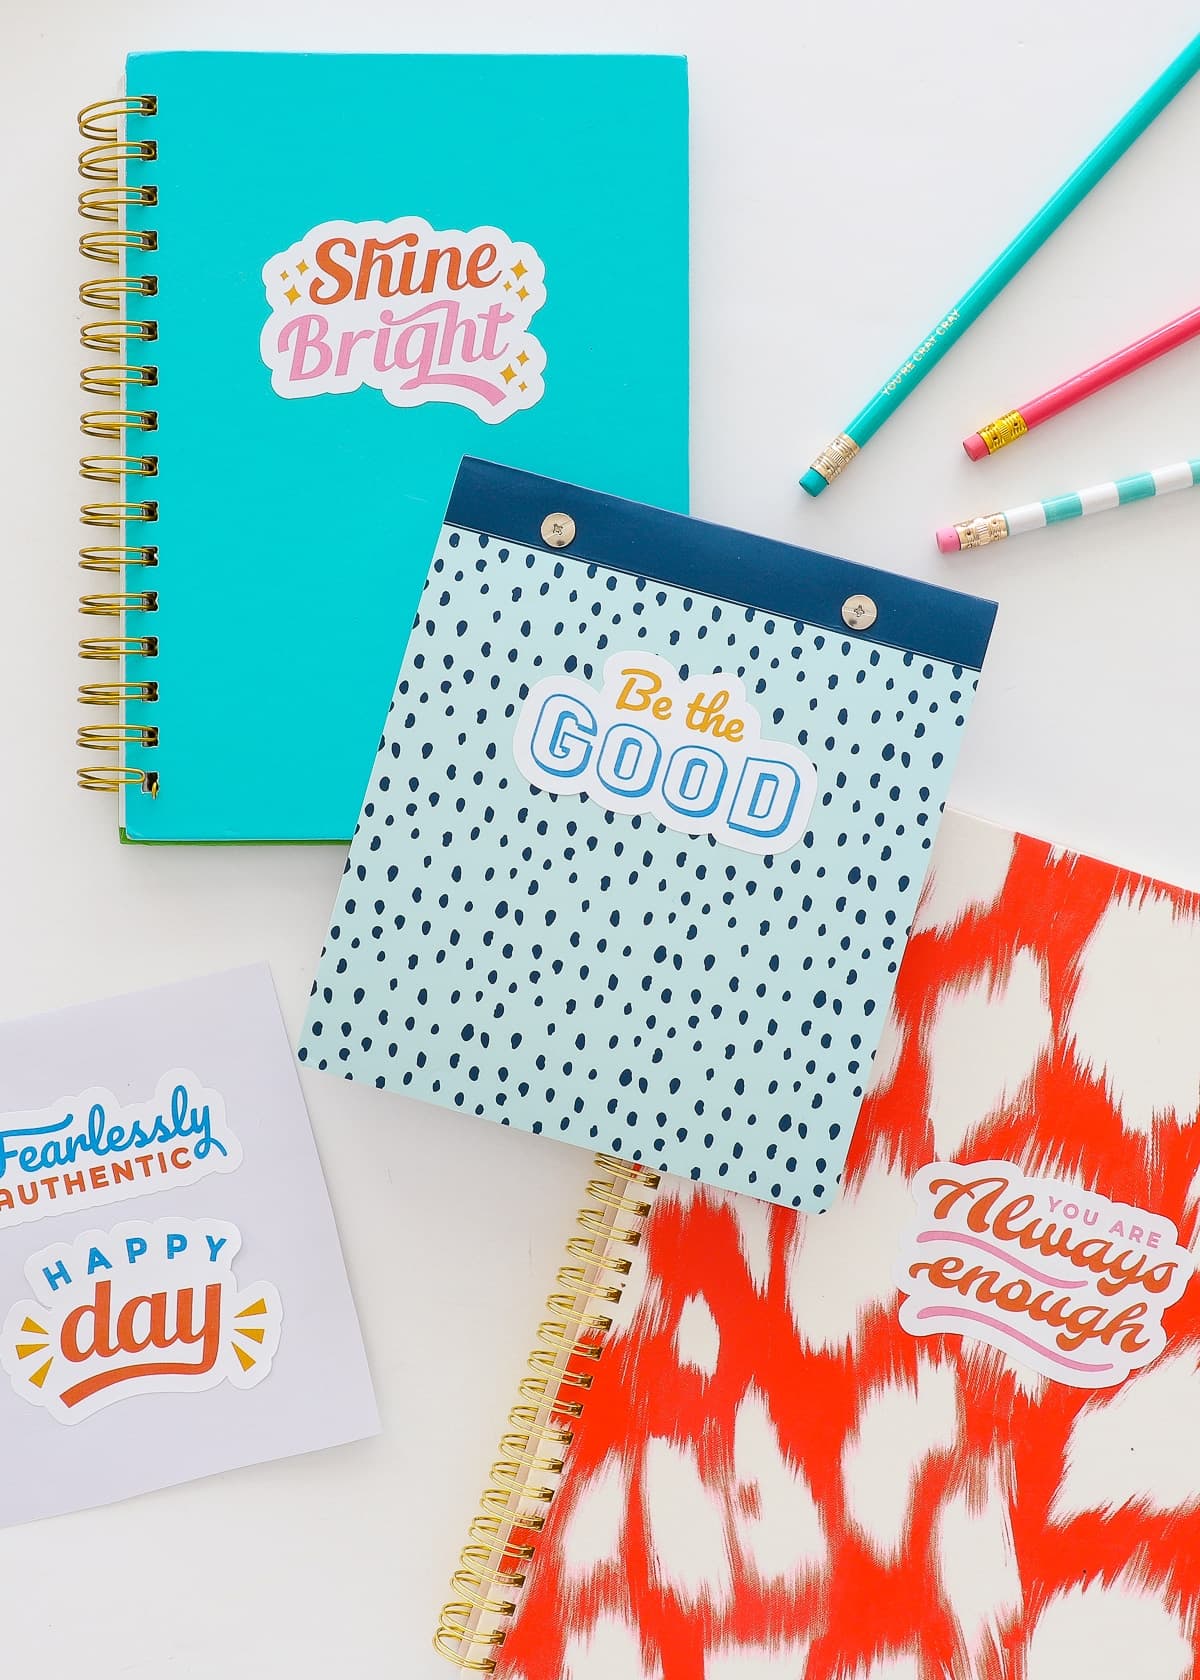 Sticker decals on colorful notebooks